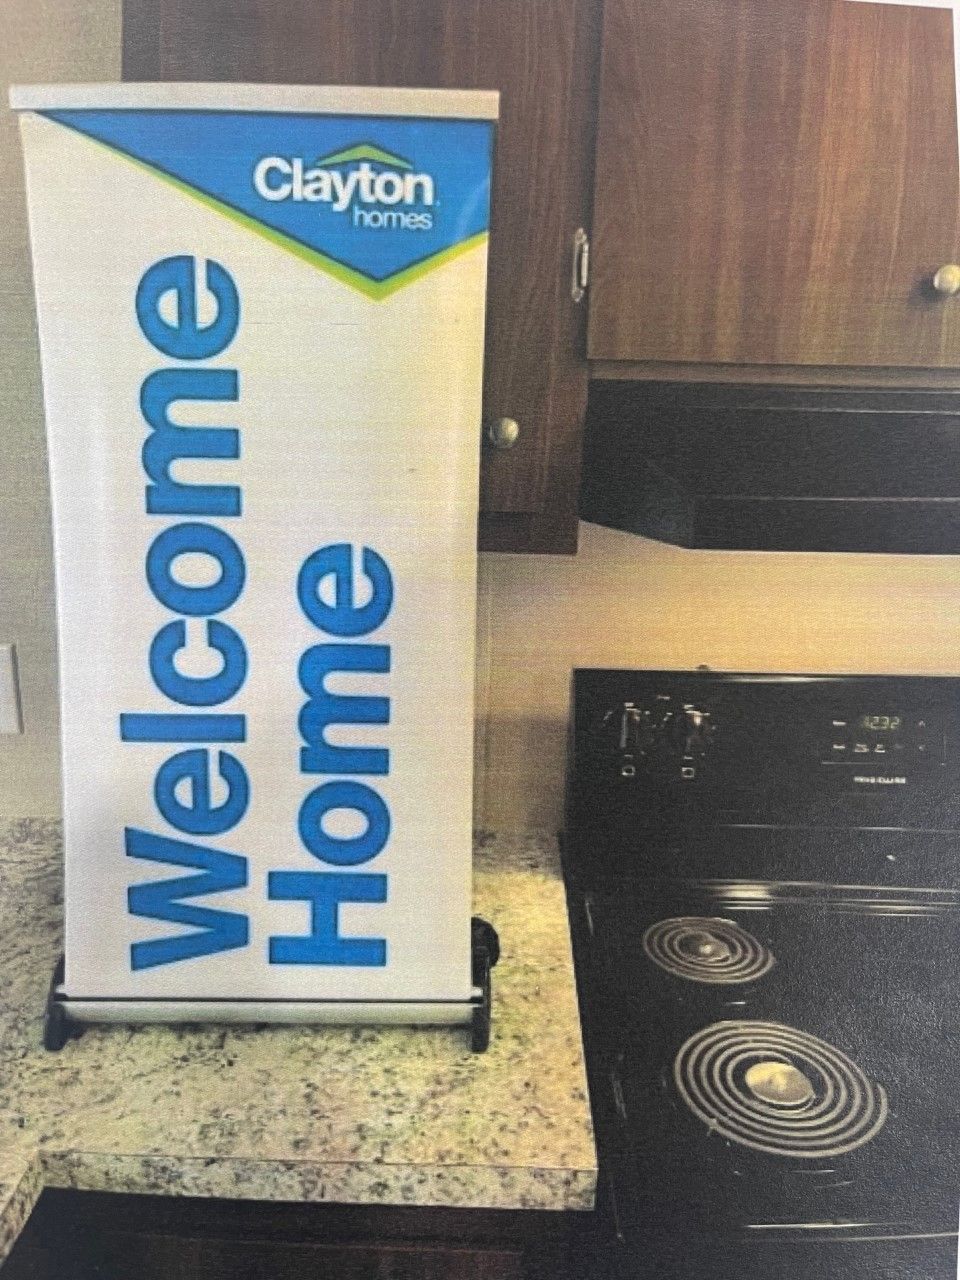 523580 – Welcome Home Brands